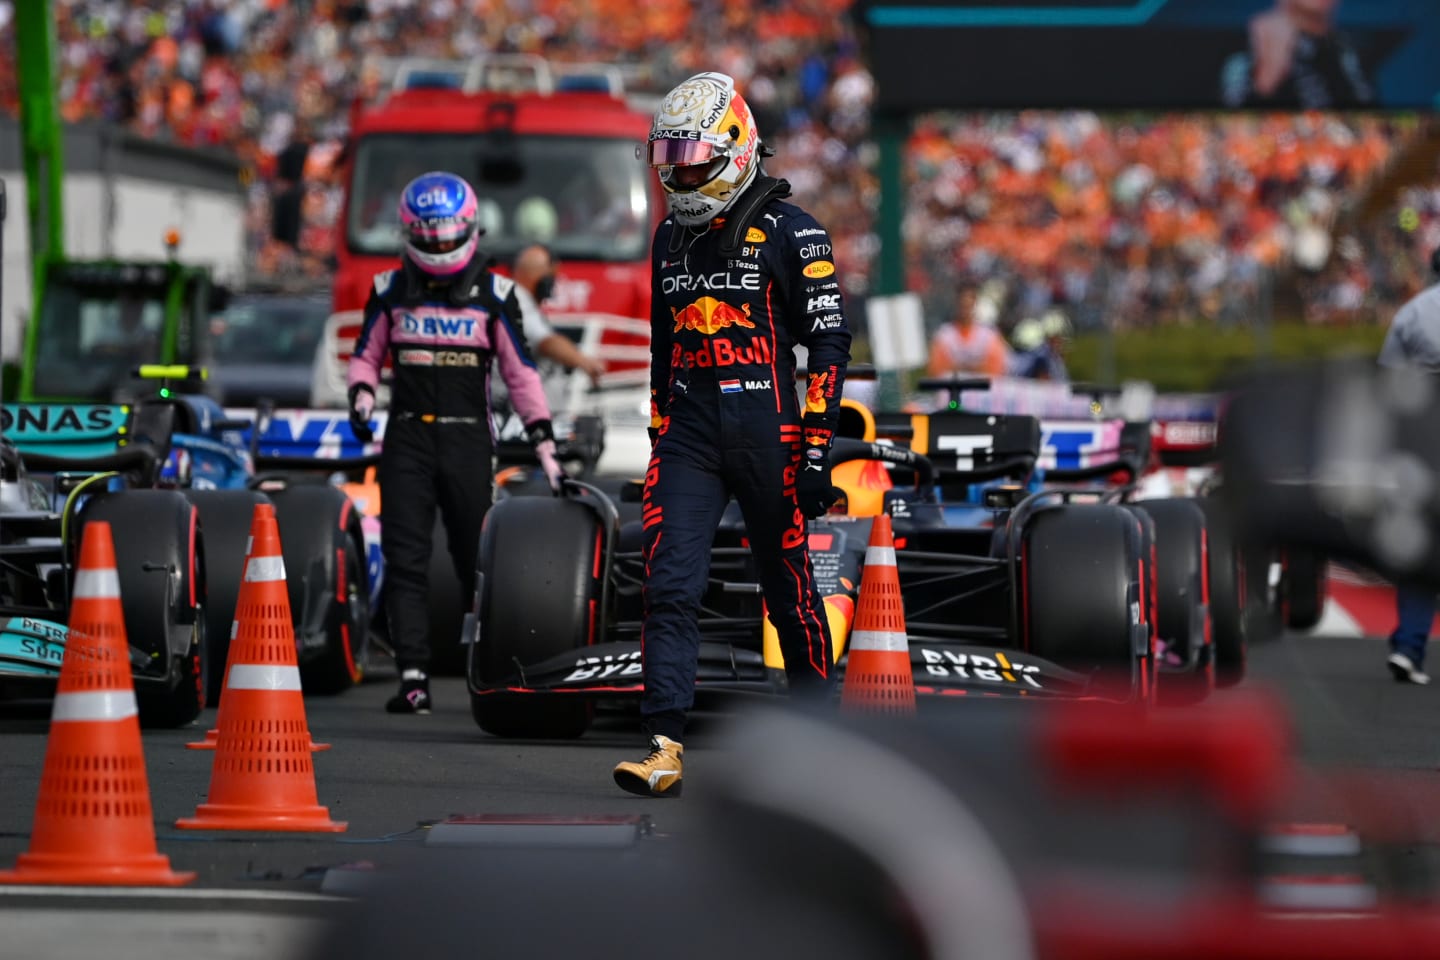 BUDAPEST, HUNGARY - JULY 30: Tenth place qualifier Max Verstappen of the Netherlands and Oracle Red Bull Racing walks in parc ferme during qualifying ahead of the F1 Grand Prix of Hungary at Hungaroring on July 30, 2022 in Budapest, Hungary. (Photo by Dan Mullan/Getty Images)